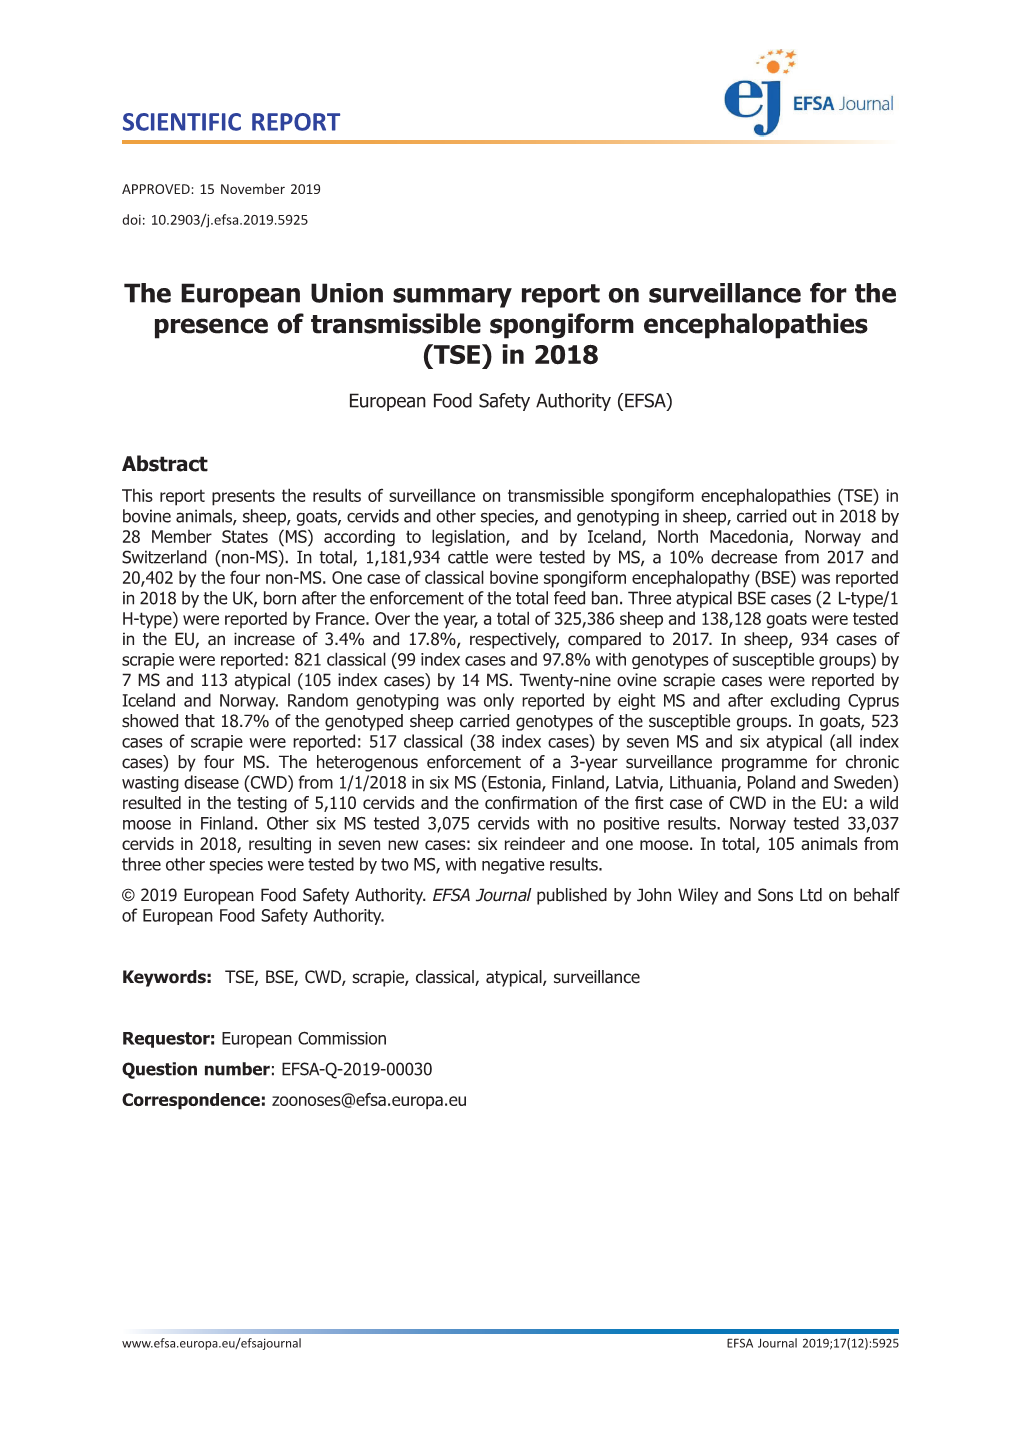 The European Union Summary Report on Surveillance for the Presence of Transmissible Spongiform Encephalopathies (TSE) in 2018